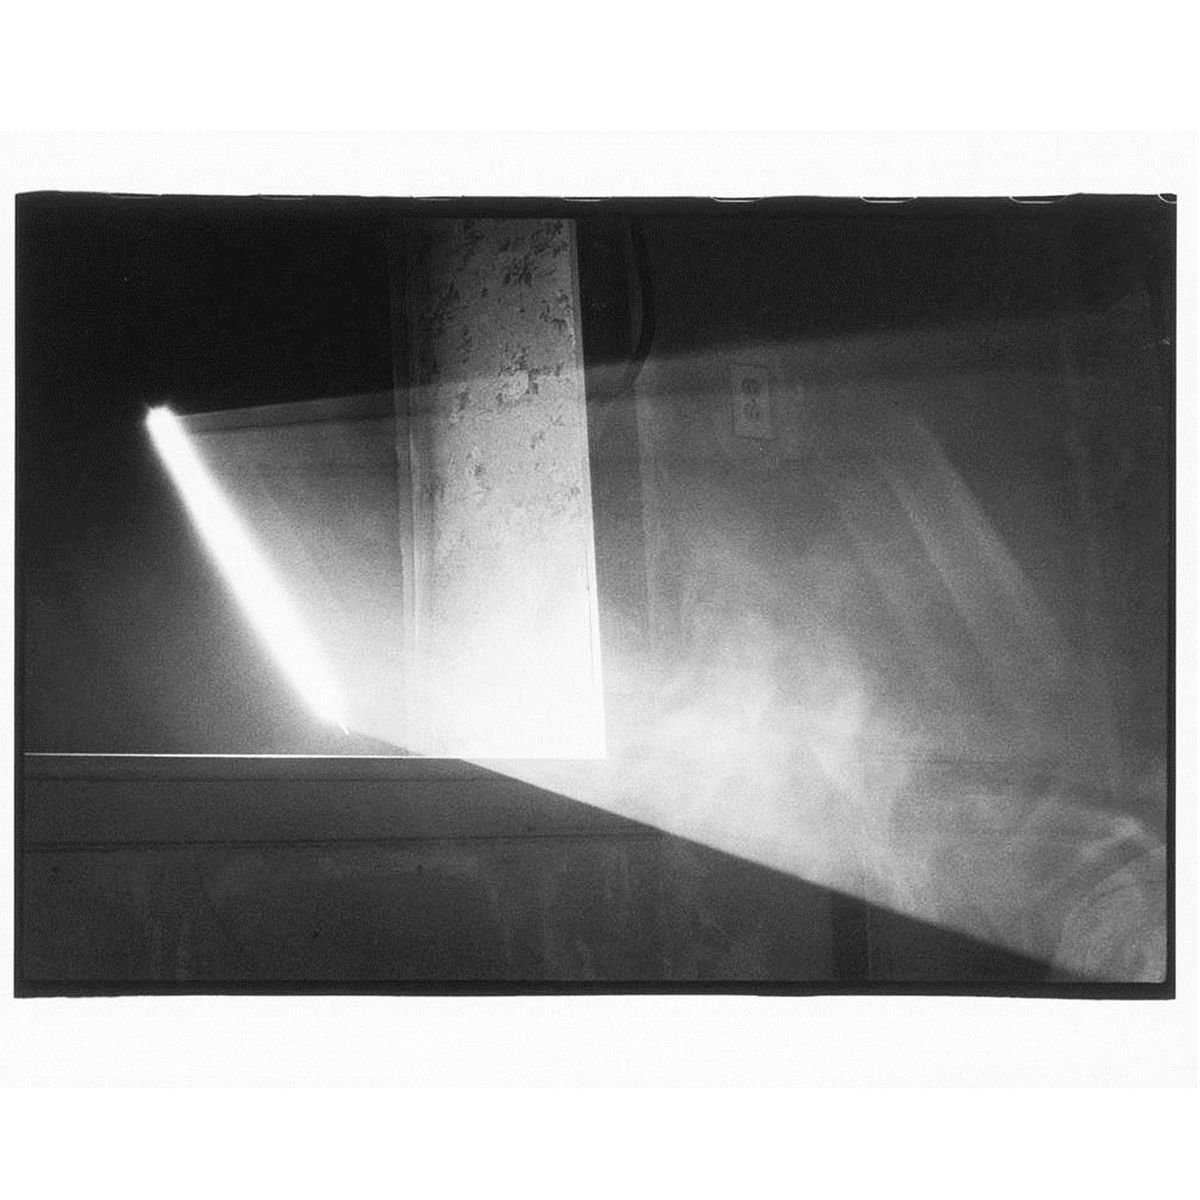 Room with Altered Window by Anthony McCall